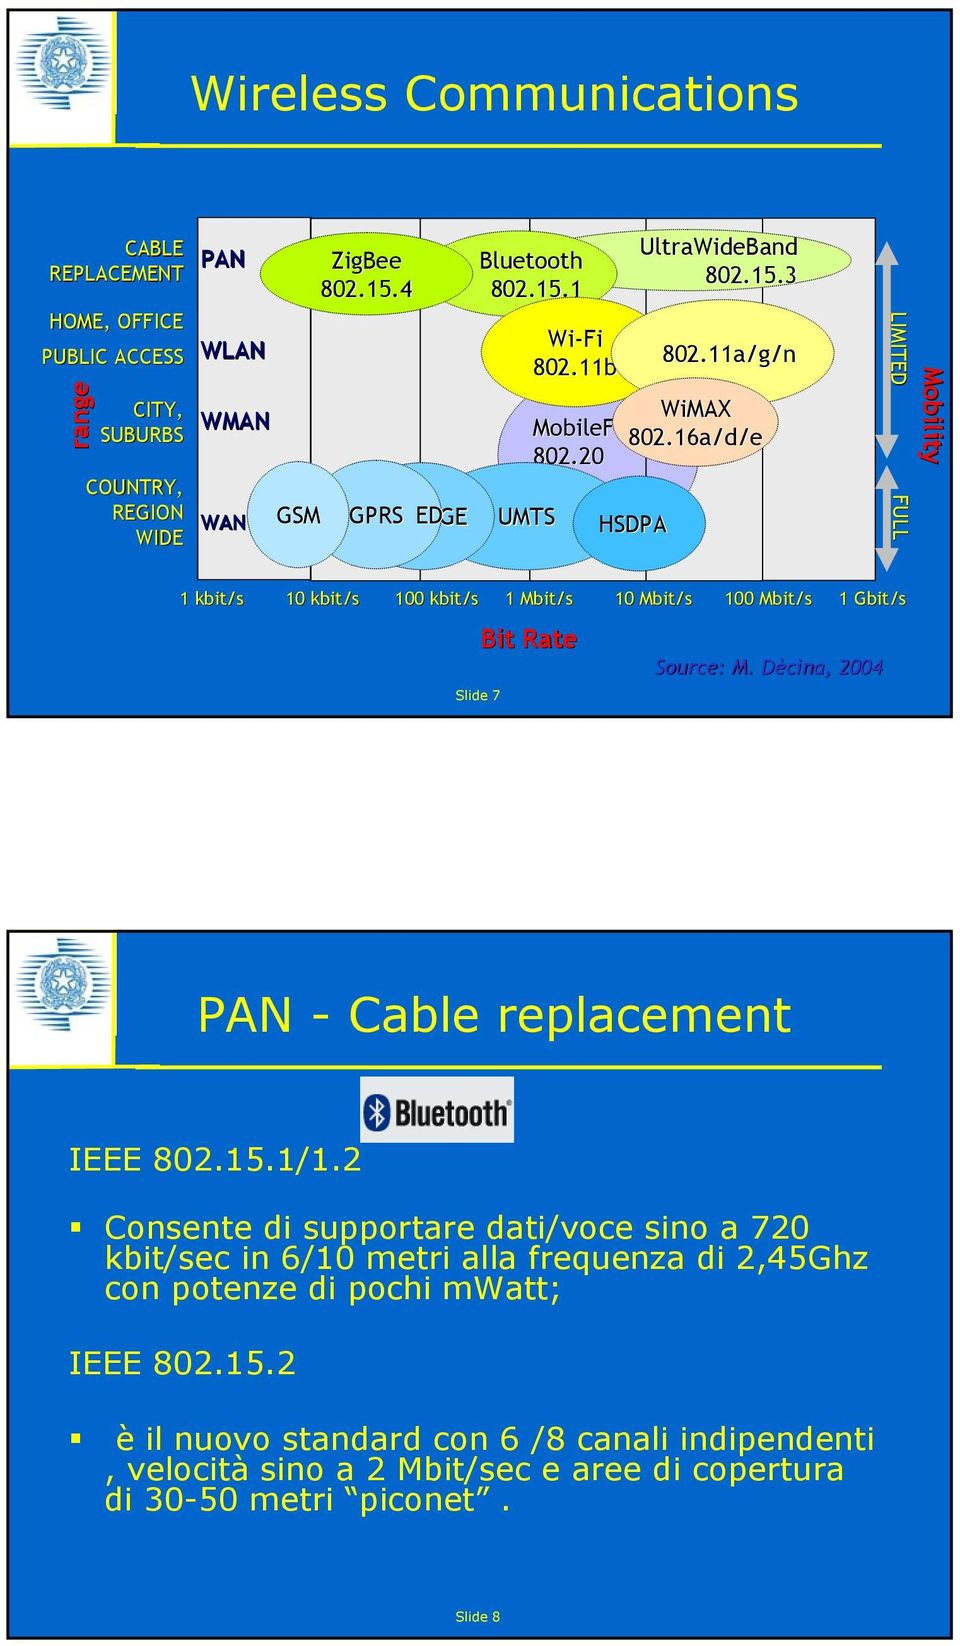 11a/g/n Mobility LIMITED FULL 1 kbit/s 10 kbit/s 100 kbit/s 1 Mbit/s 10 Mbit/s 100 Mbit/s Bit Rate Slide 7 1 Gbit/s Source: : M. Dècina, D 2004 PAN - Cable replacement IEEE 802.